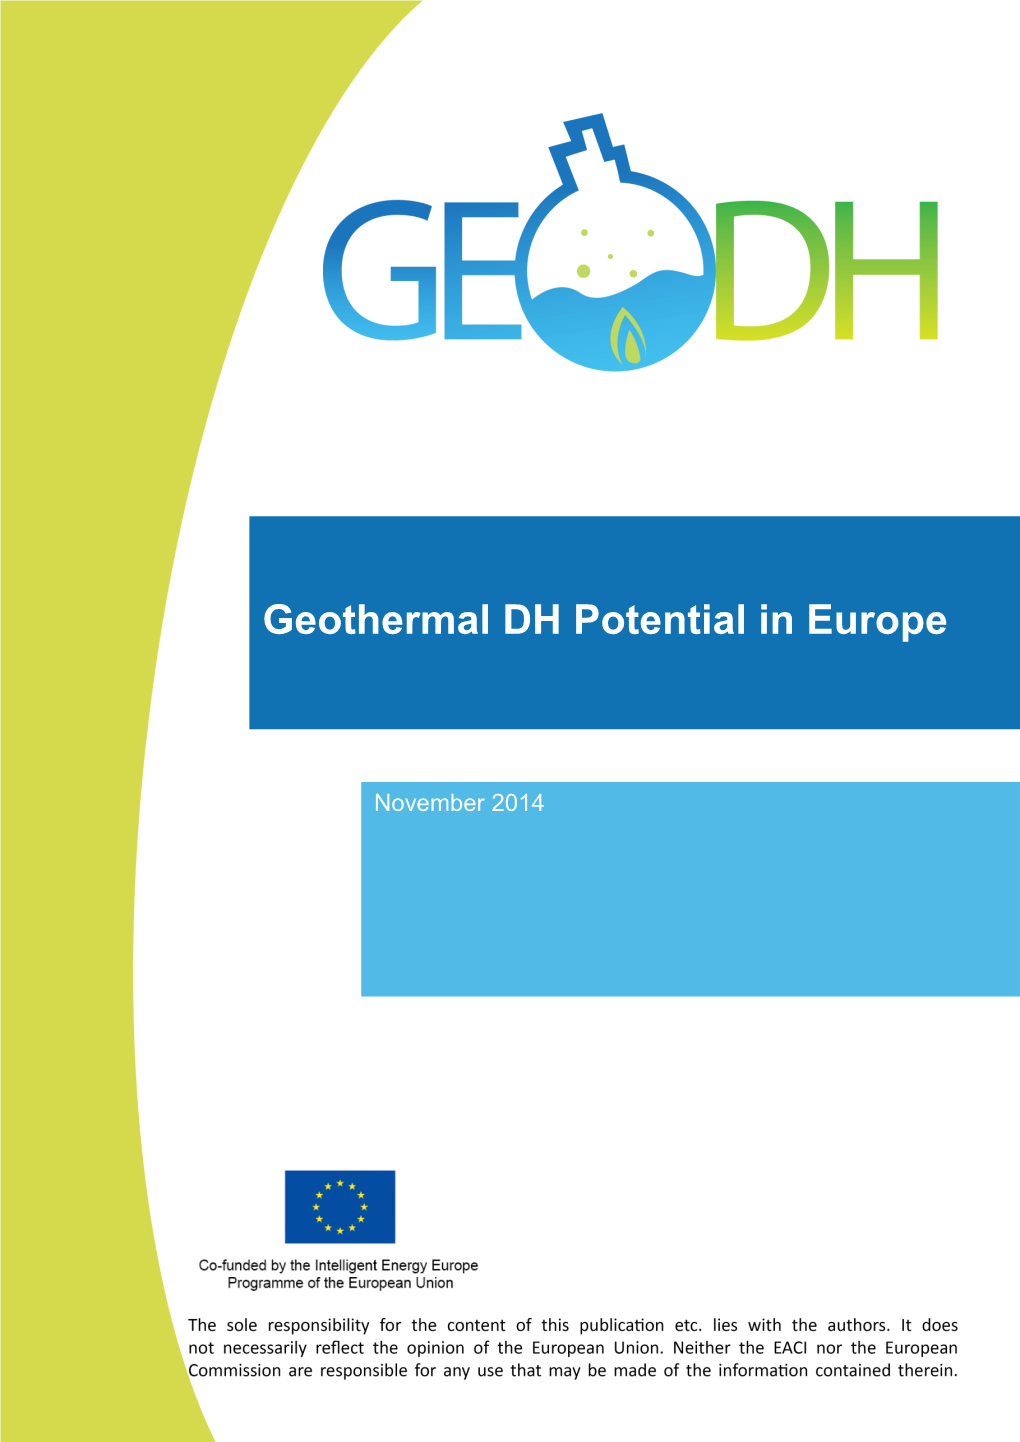 Geothermal DH Potential in Europe